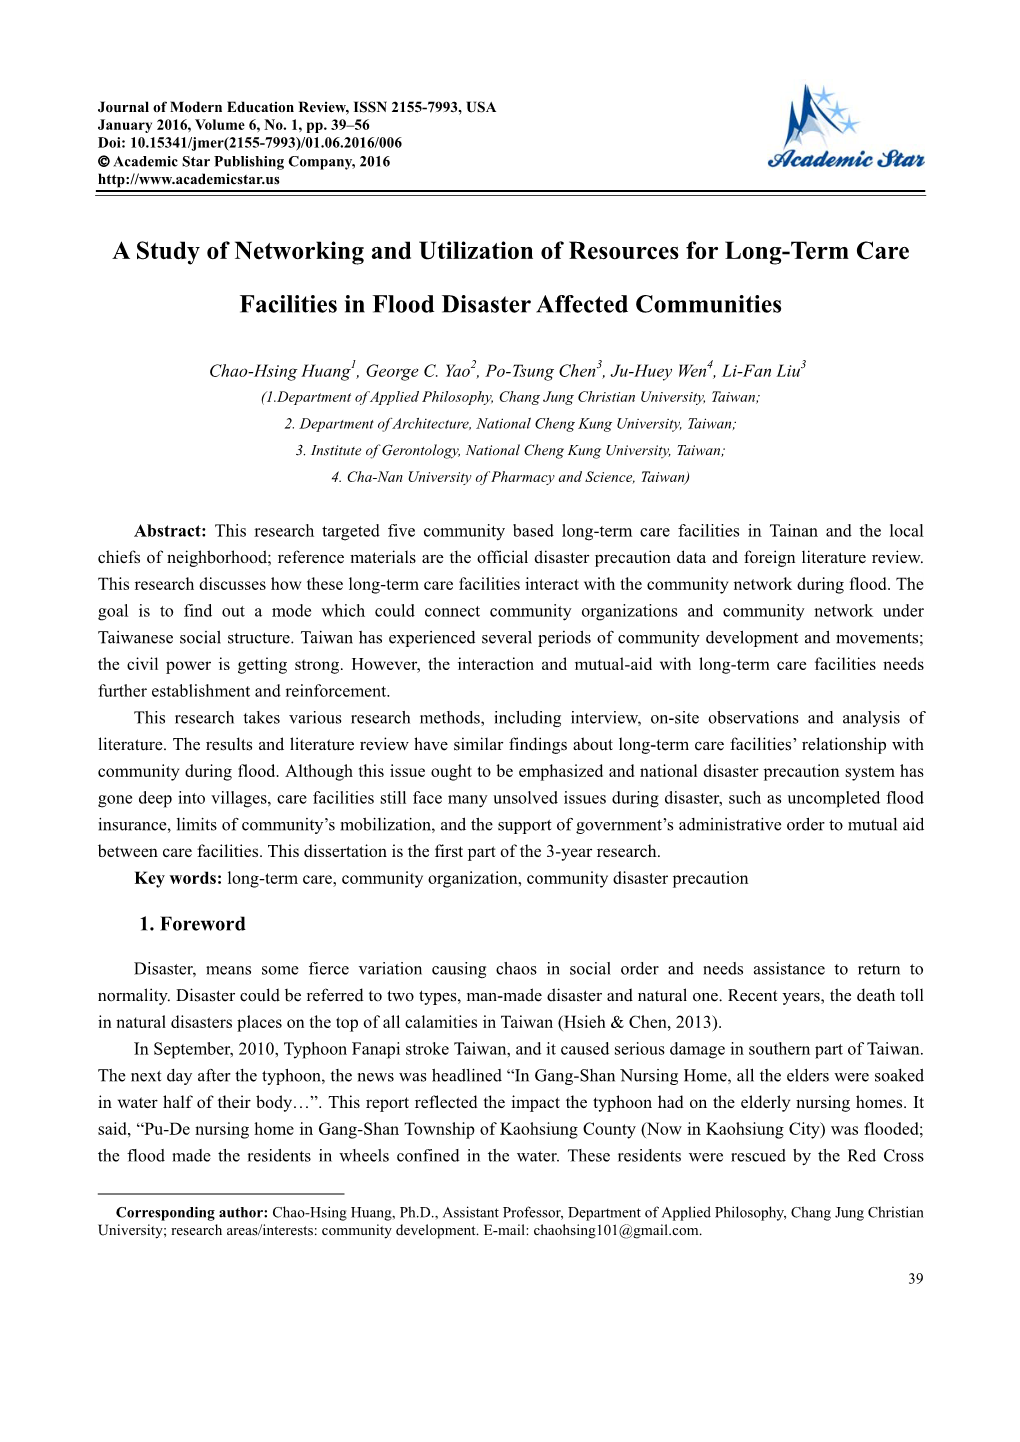 A Study of Networking and Utilization of Resources for Long-Term Care